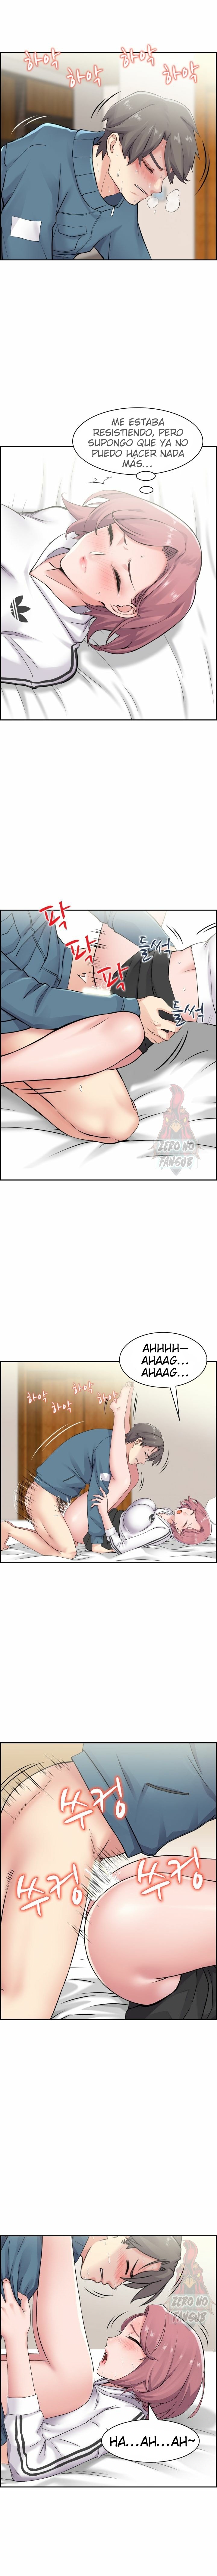 Sister in Law Manhwa Raw - Chapter 11 Page 5